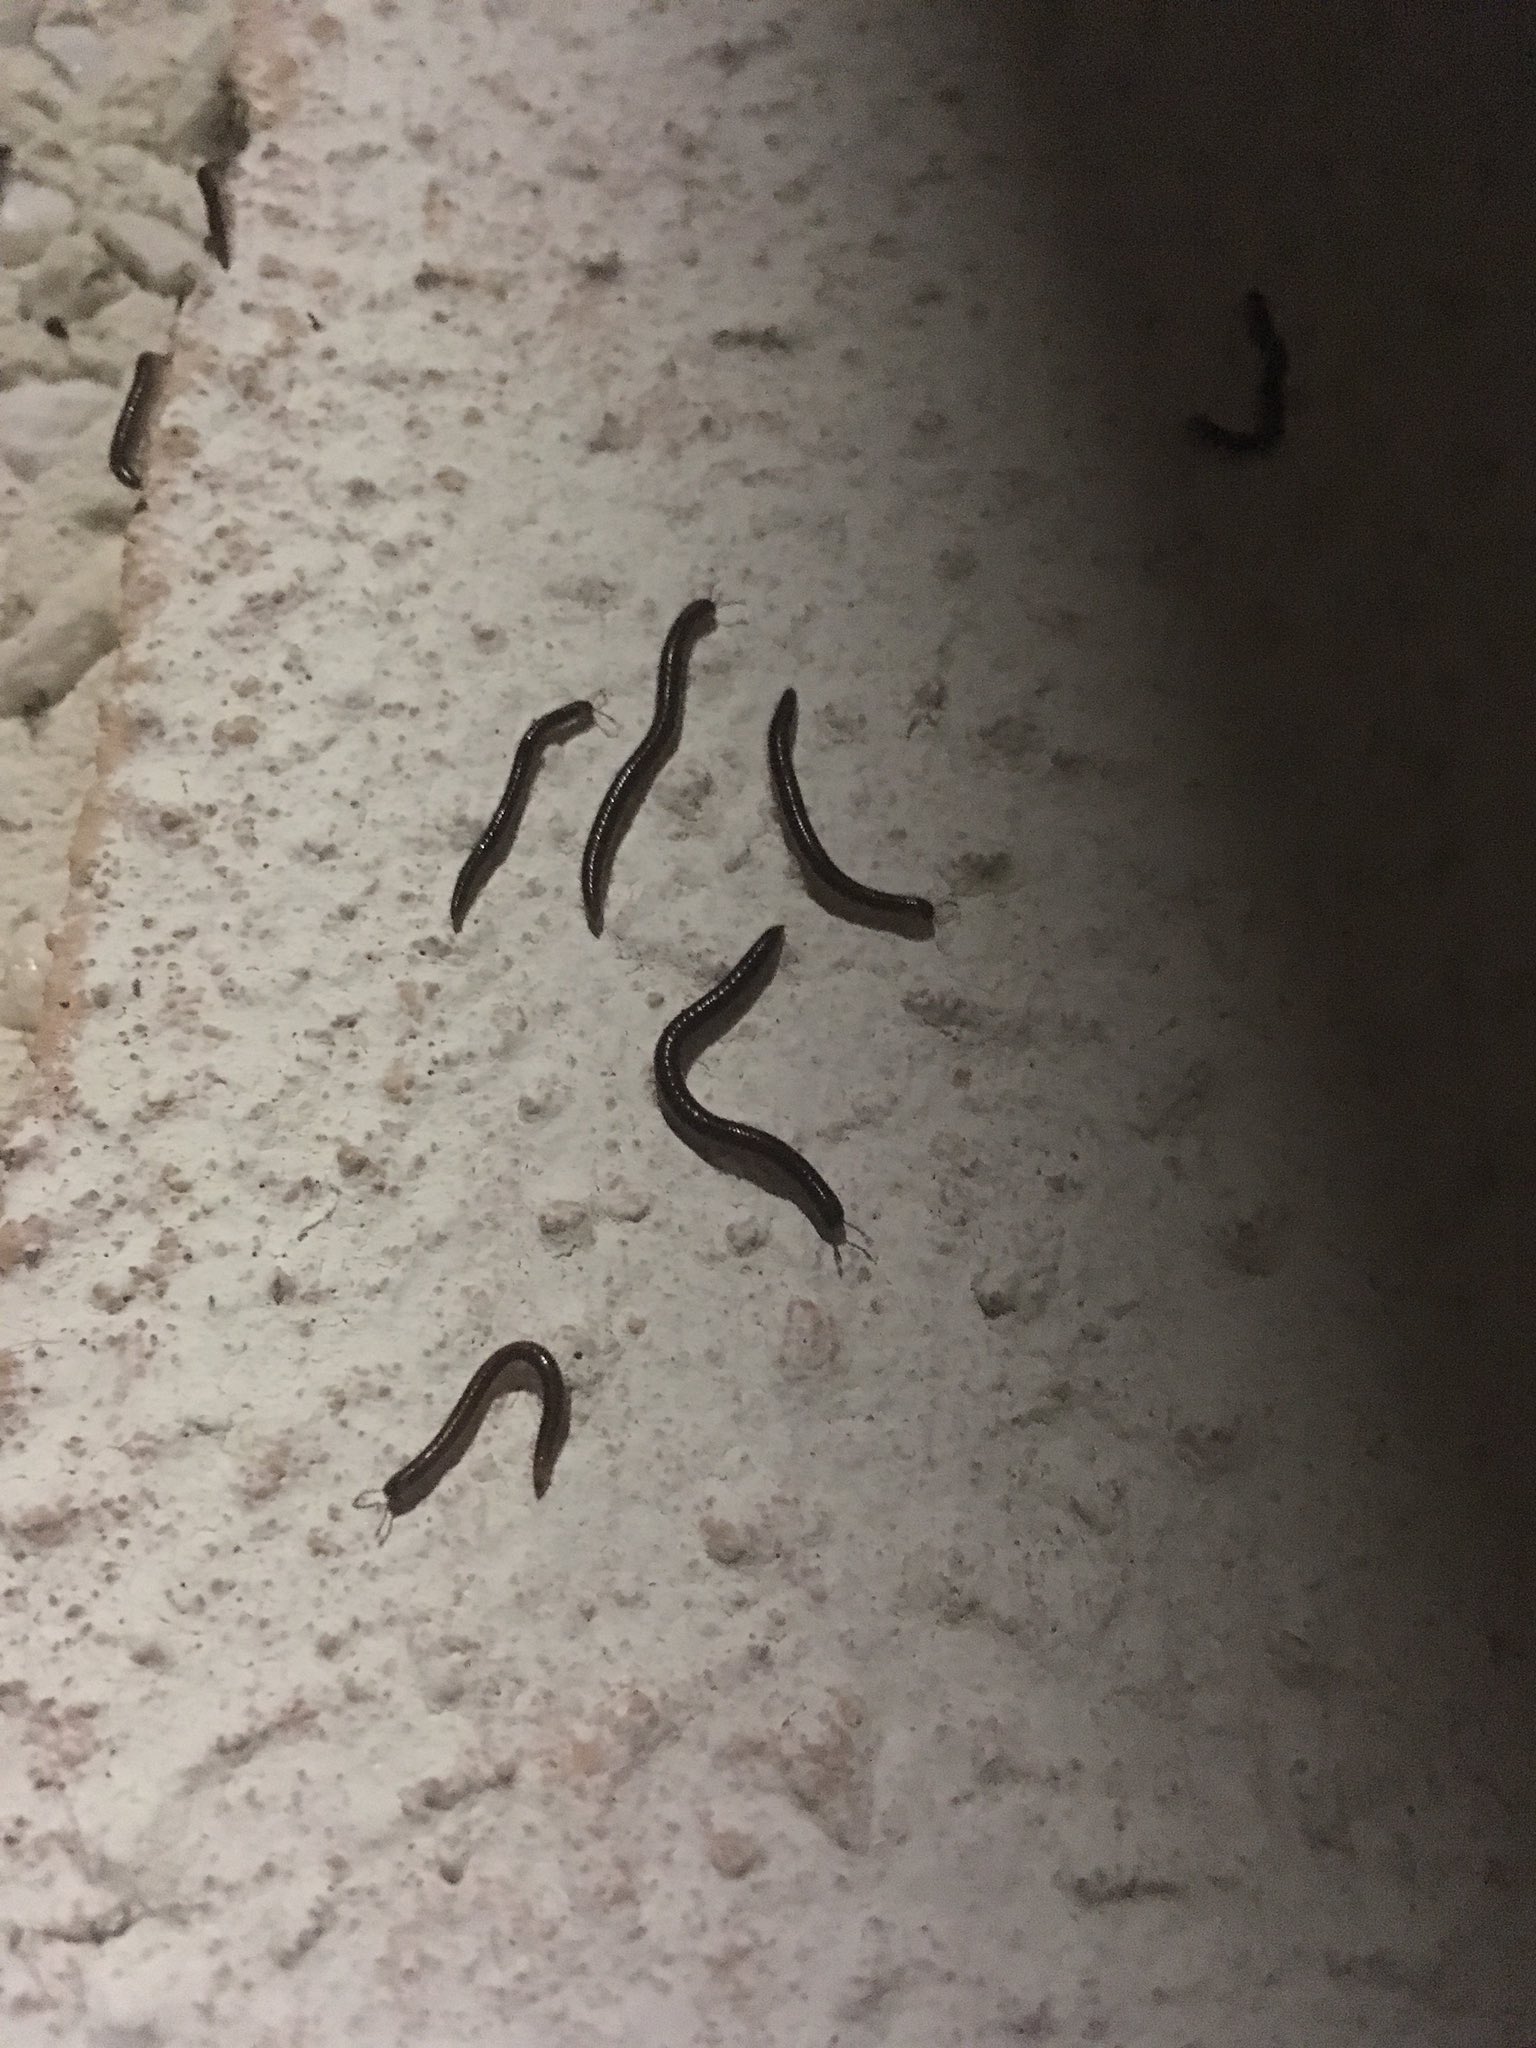 Simon Kelly on X: What are these little #worm #creatures about